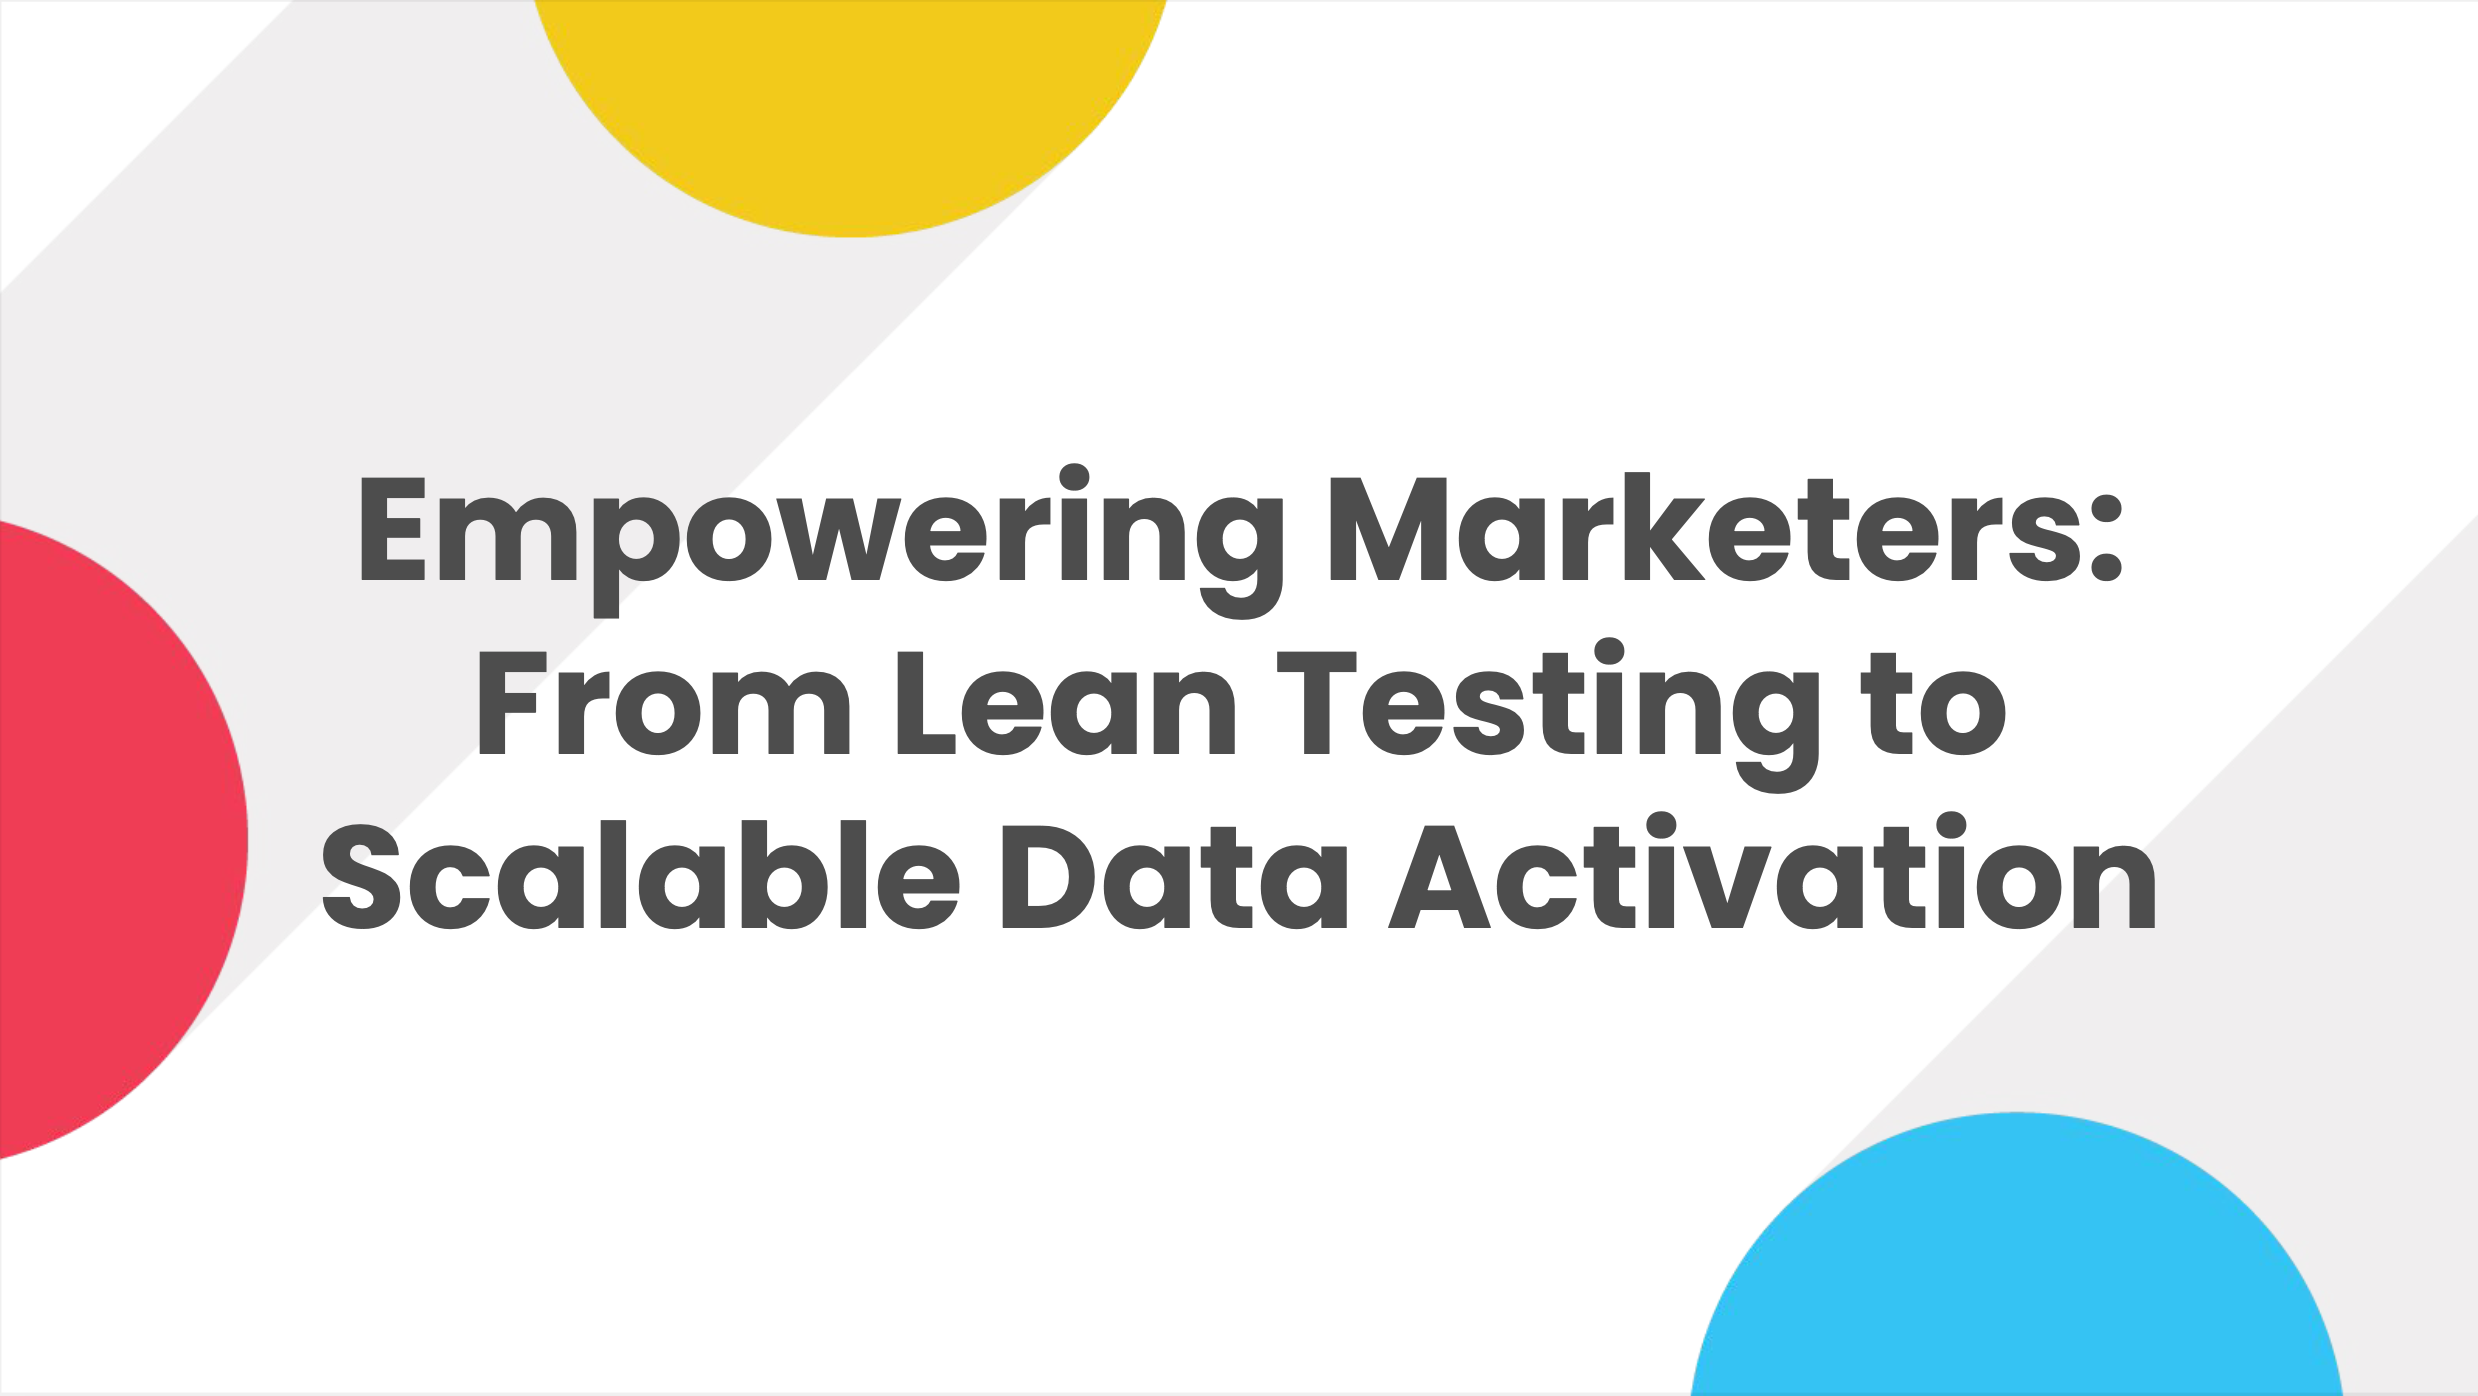 Empowering Marketers: From Lean Testing to Scalable Data Activation